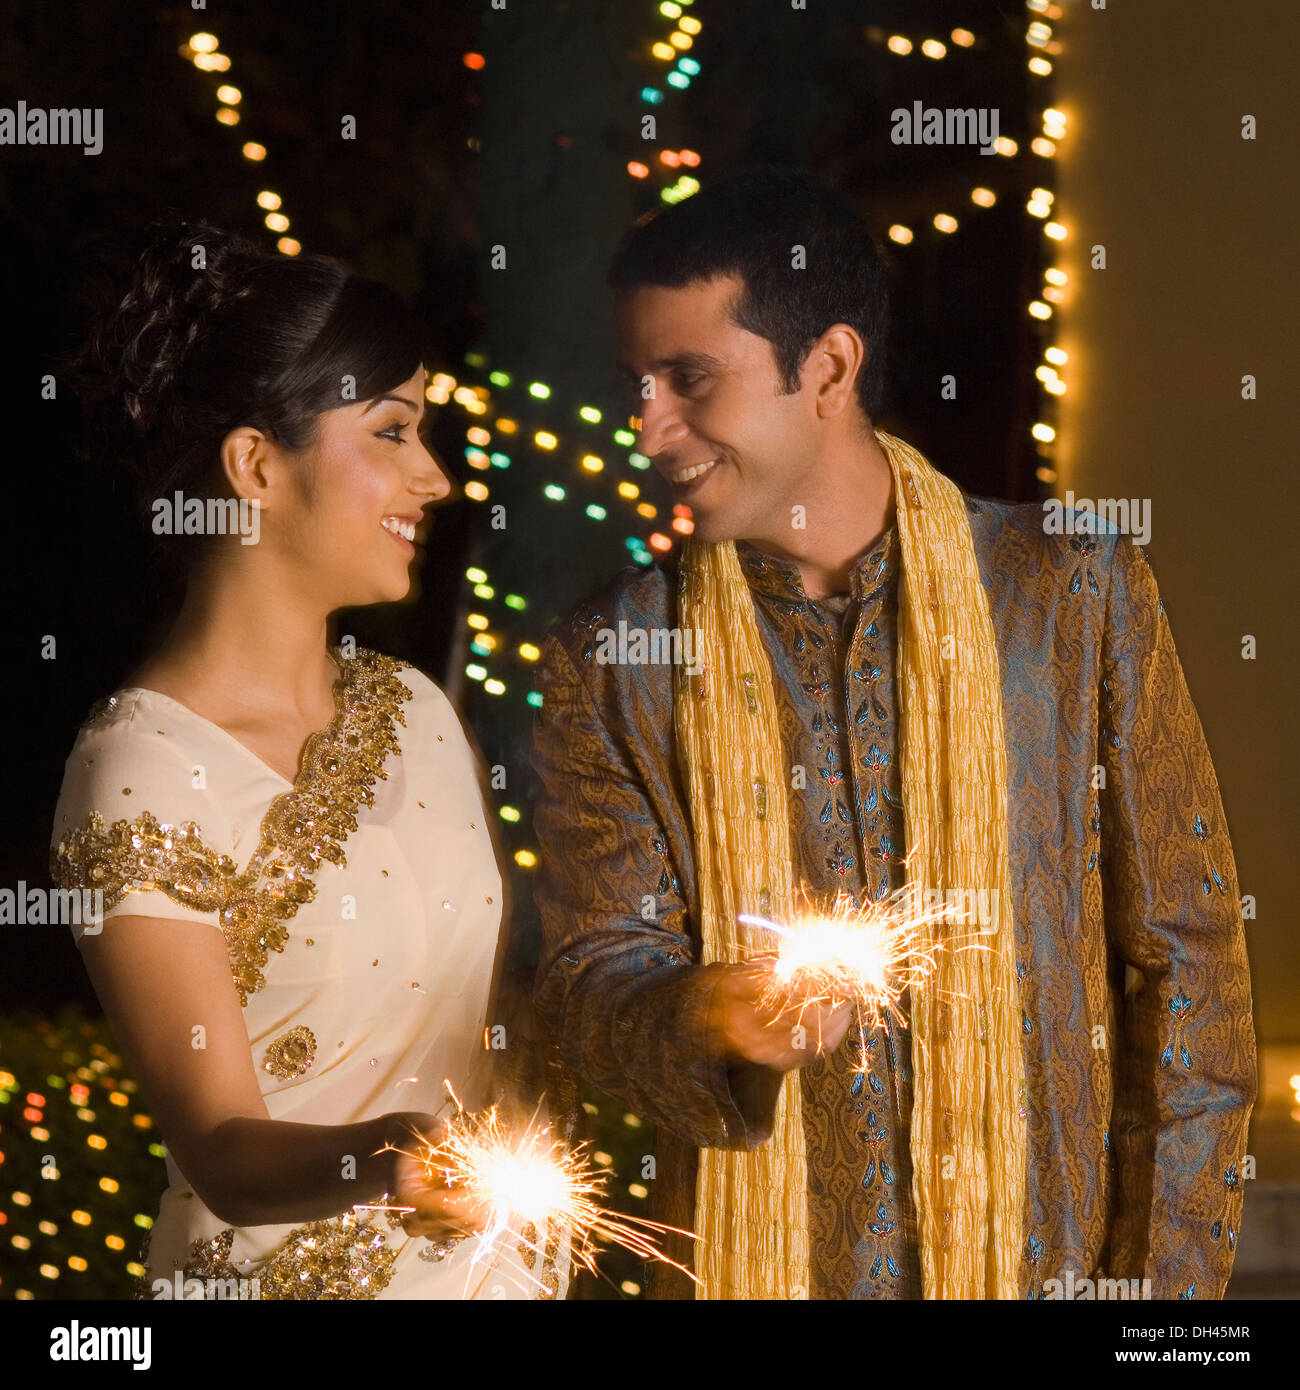 35 Diwali Photography Ideas | How to Take Better Diwali Festival Pictures